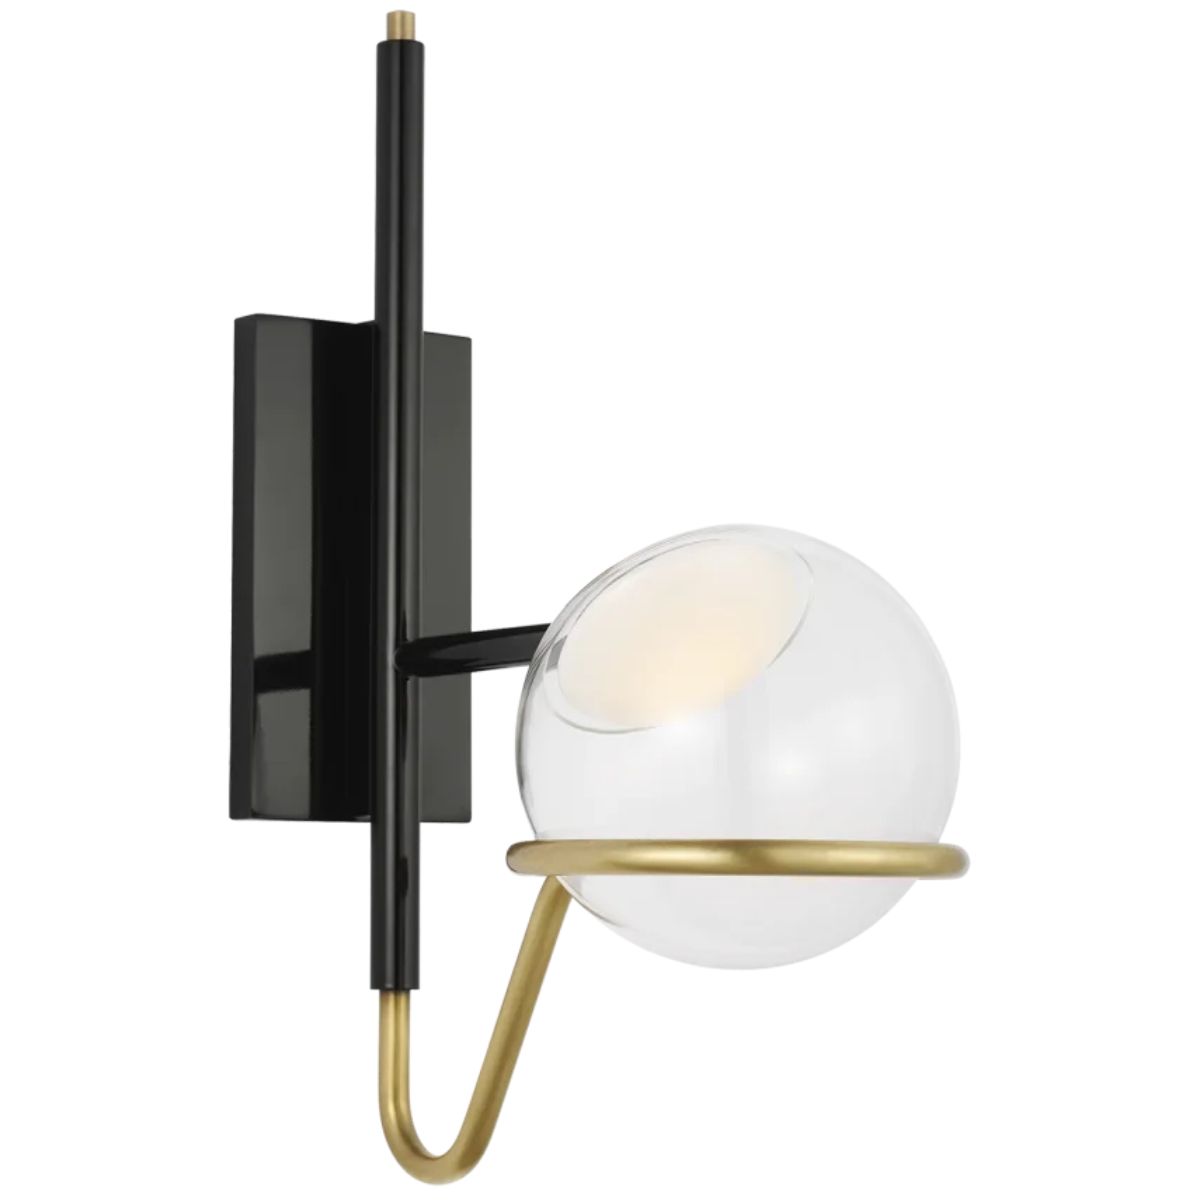 Crosby 18 in. LED Wall Sconce 120V Black & Natural Brass finish